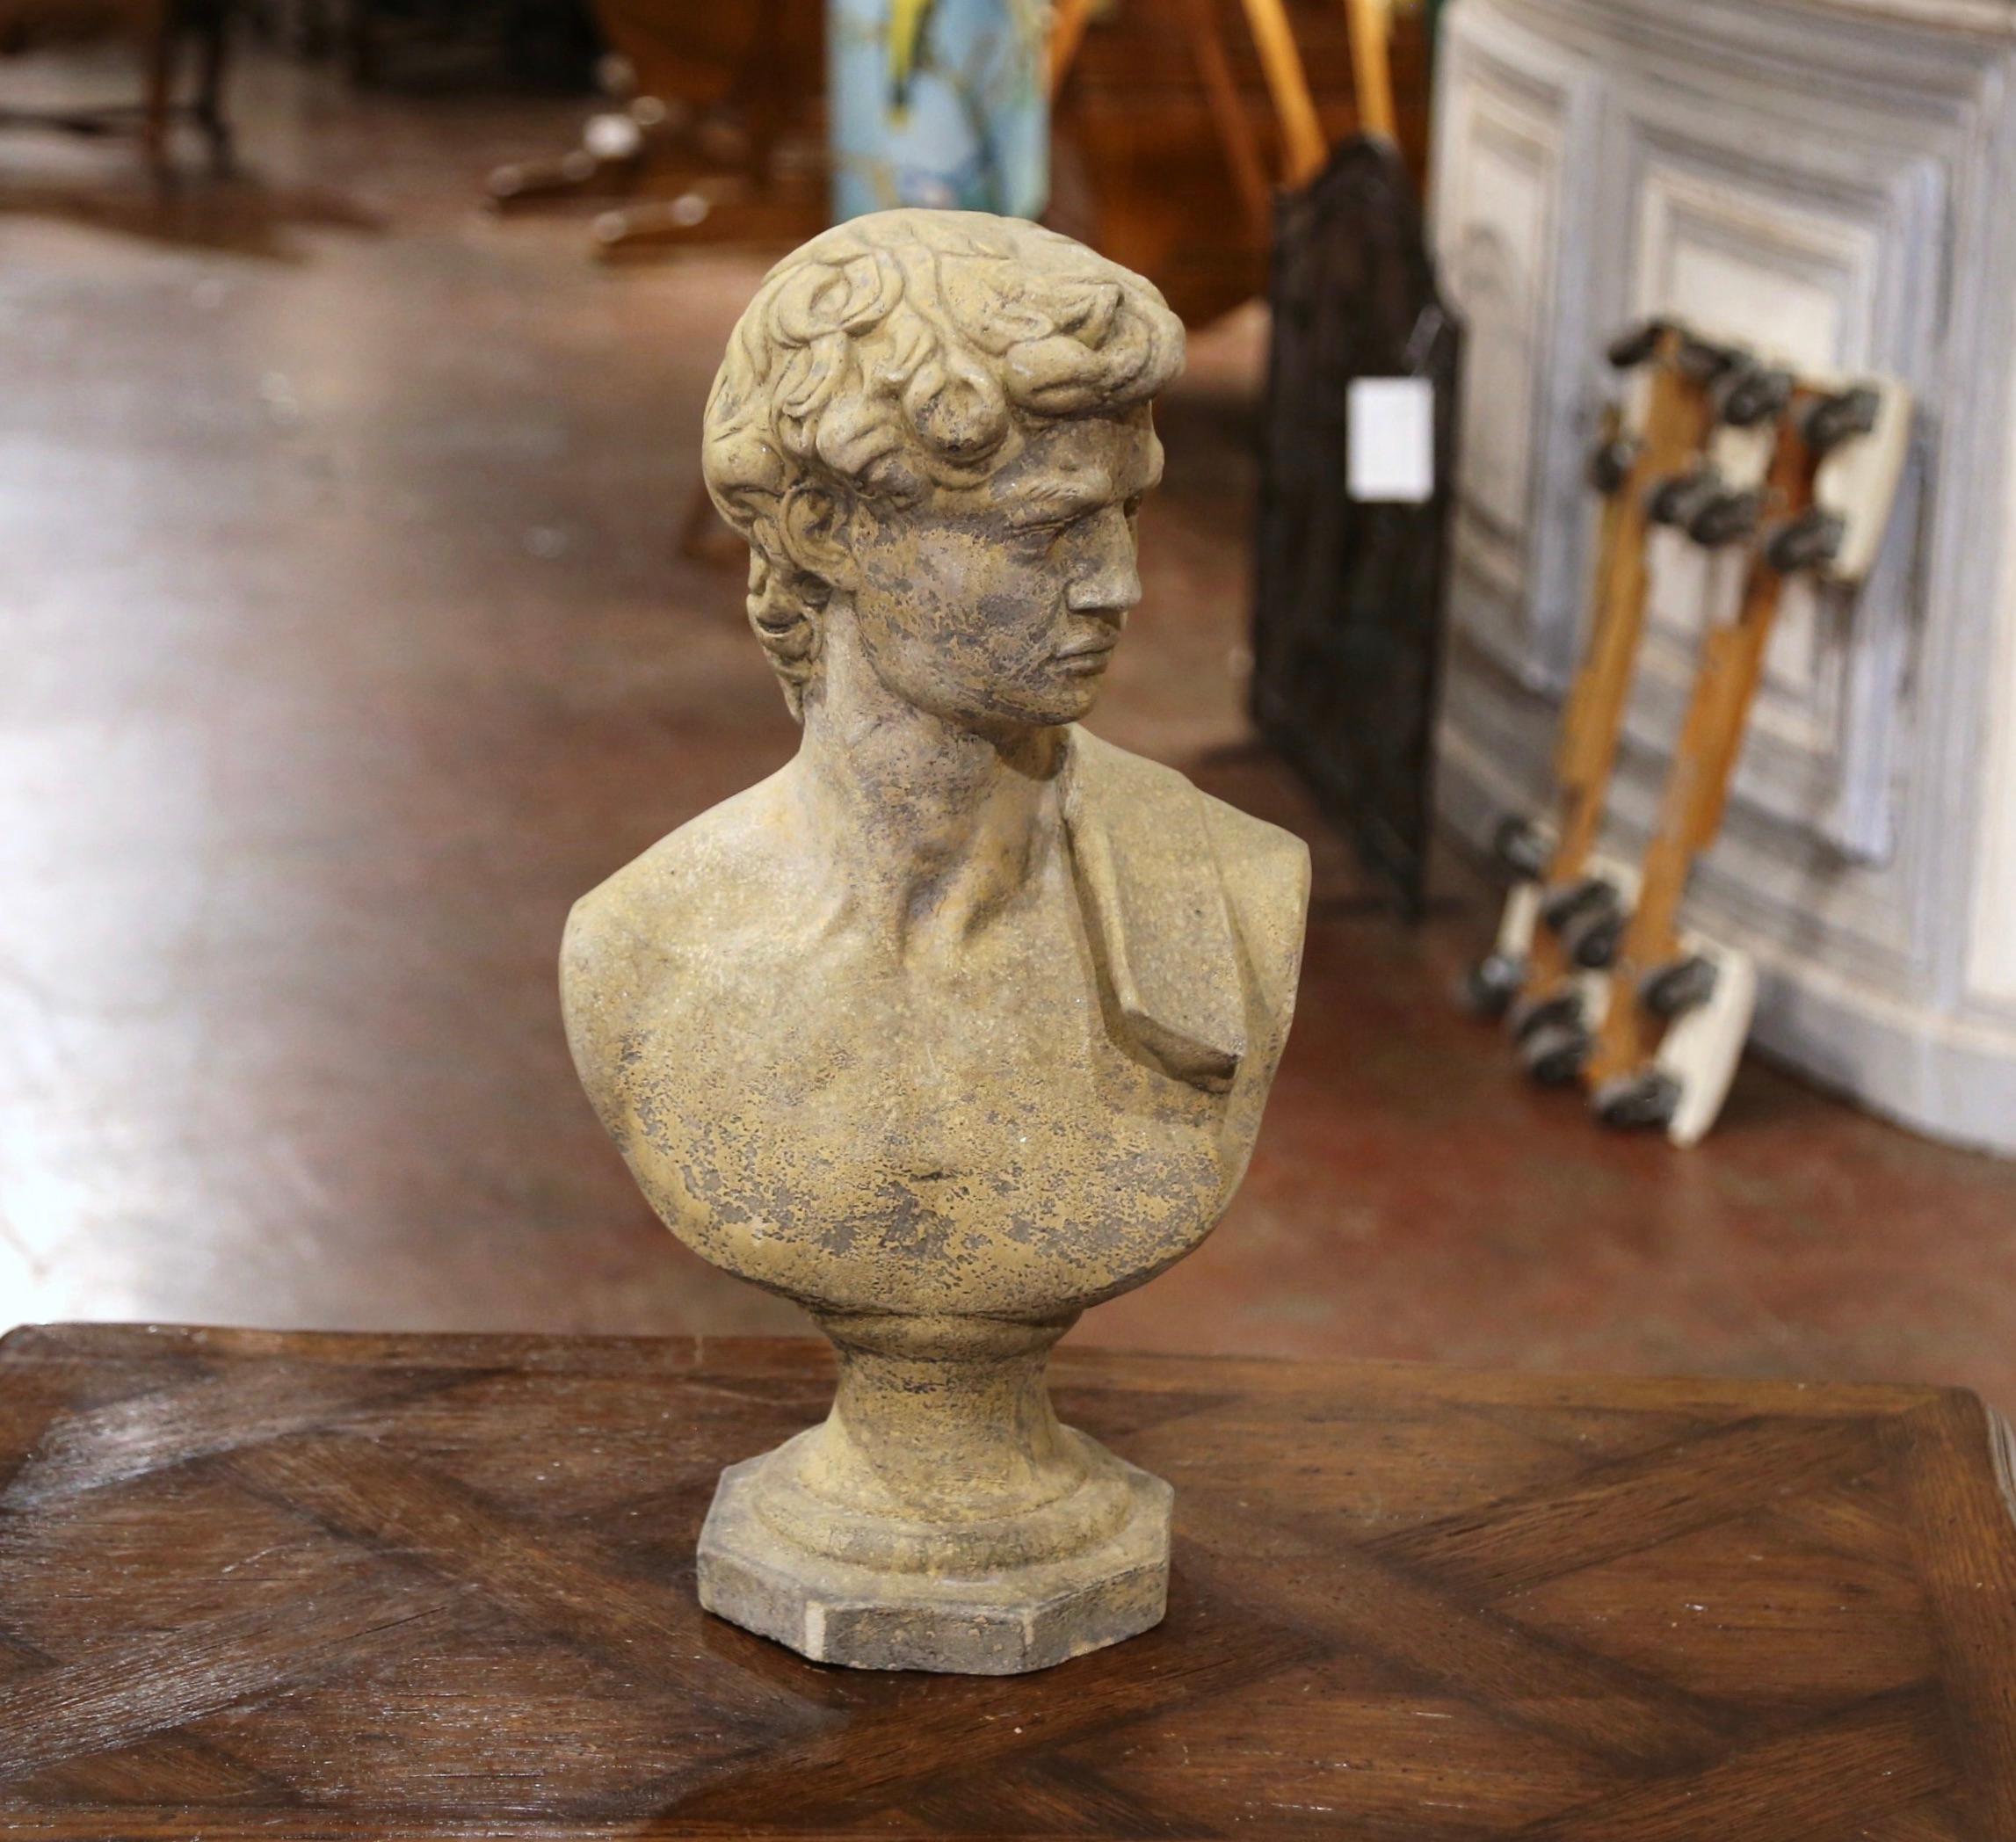 Decorate a garden or patio with this elegant antique outdoor statue. Carved of stone in France circa 1950, the figure depicts a Roman gentleman bust, head turned and wearing a cloth on his shoulder. The statuary sculpture is in excellent condition